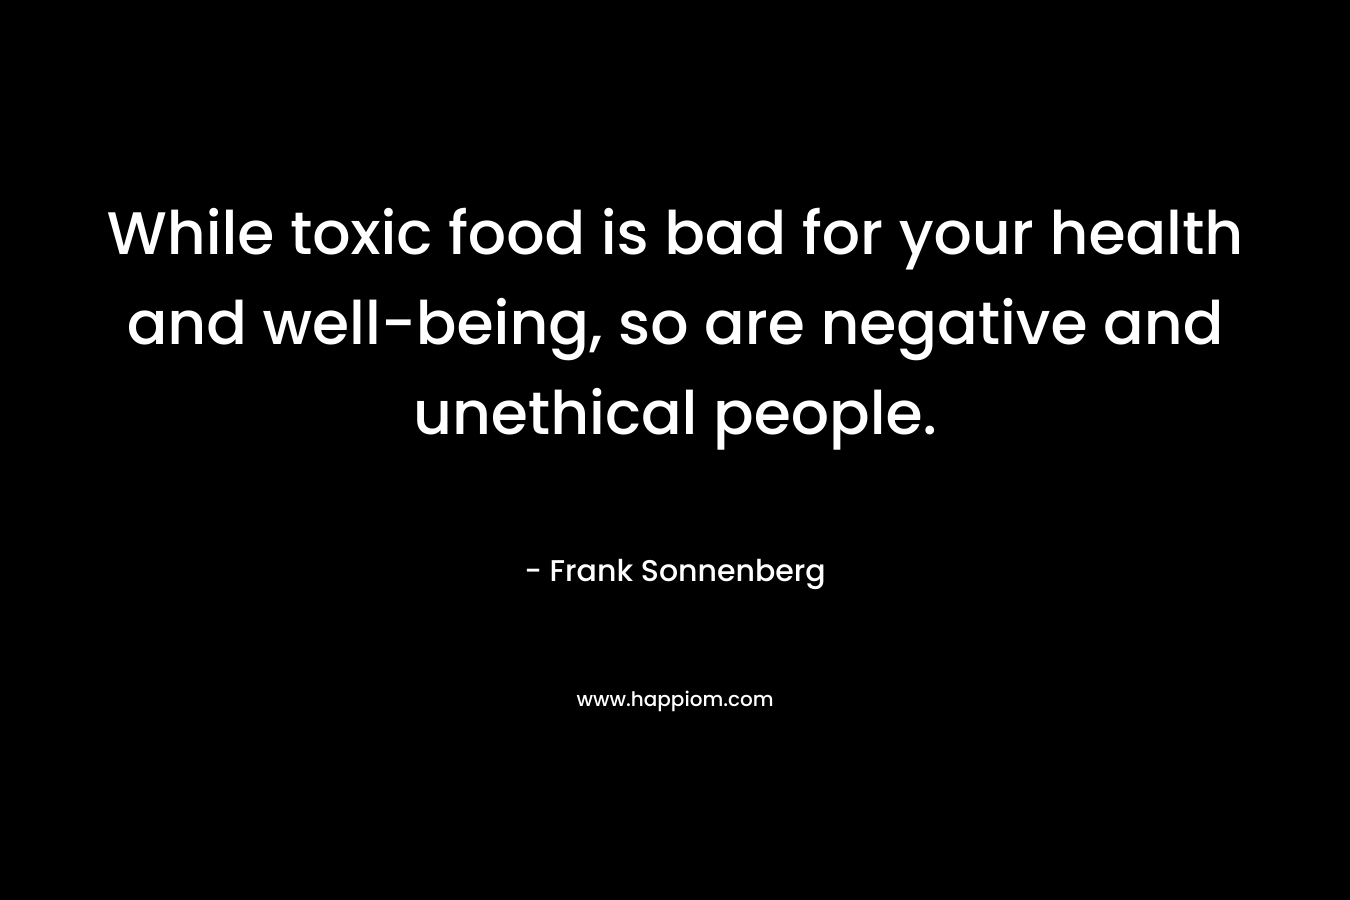 While toxic food is bad for your health and well-being, so are negative and unethical people.